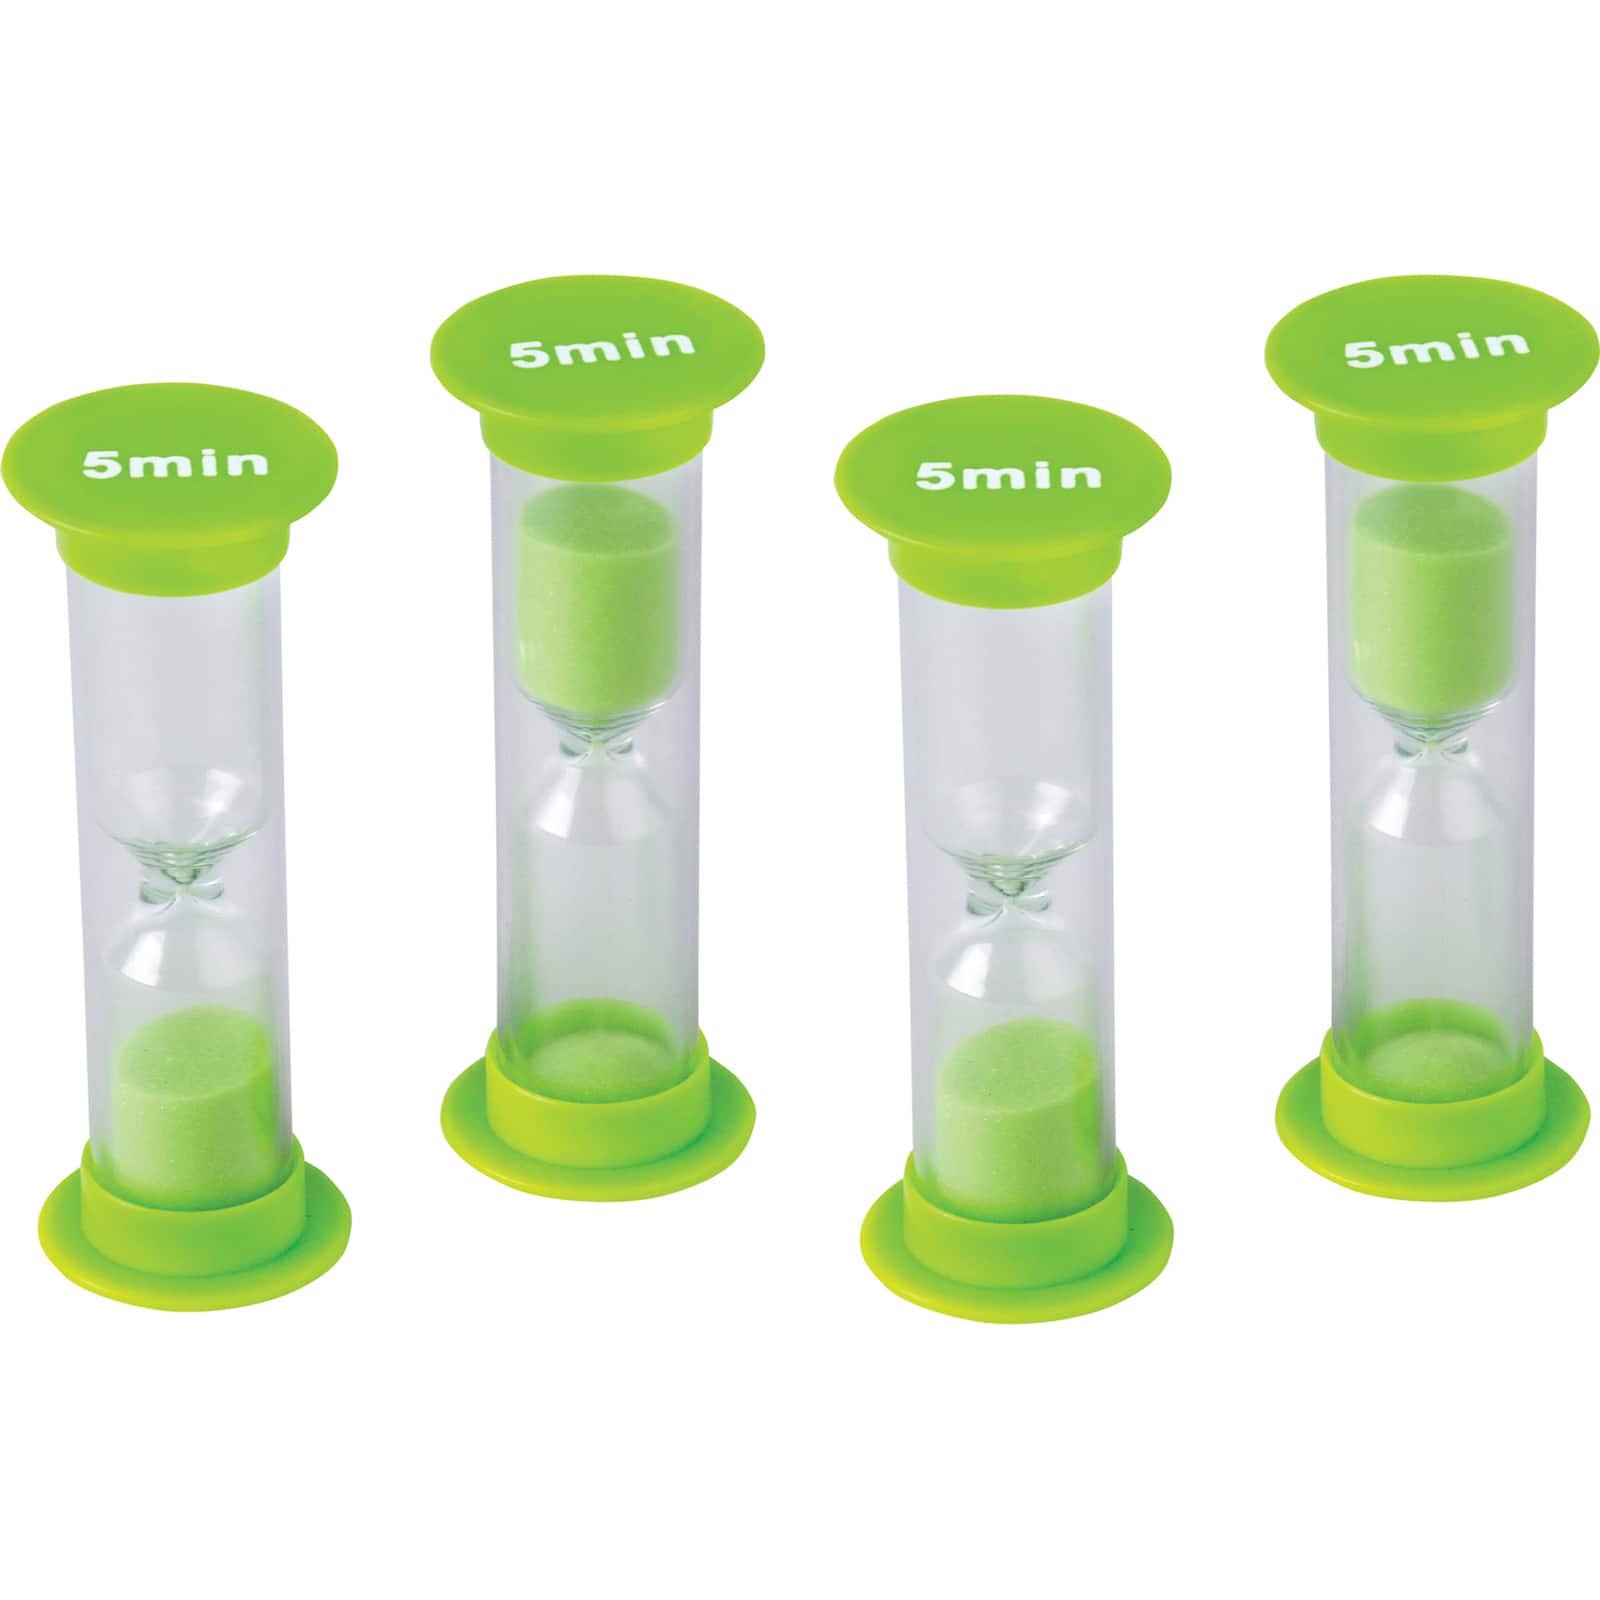 Teacher Created Resources Mini 5 Minute Sand Timers, 6 packs of 4